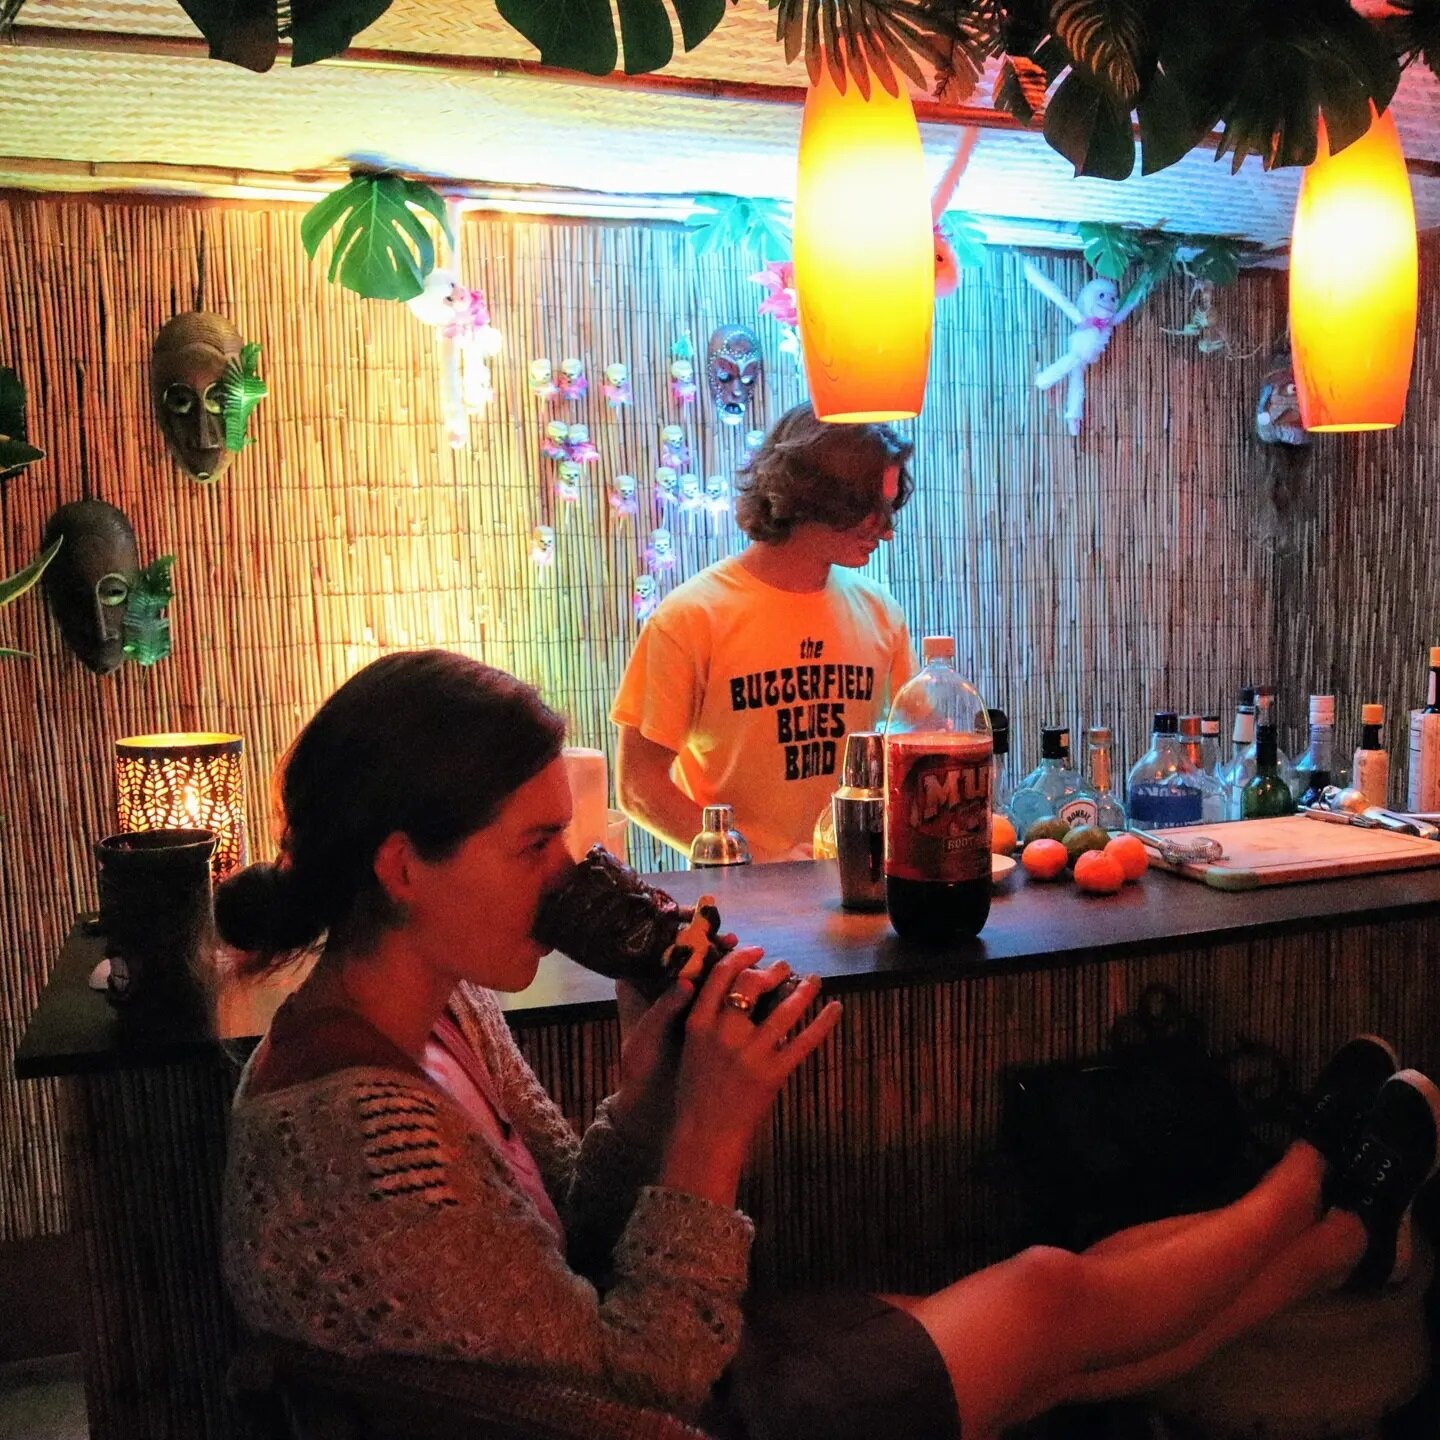 @vinny_martone helped build this tiki bar last winter and it's a straight up vibe. He is here one more week! Then he heads to blues city. 

#blues #memphis #indianapolis #tiki #tikibar #coconut #drinks #vinnymartone #indie #rock